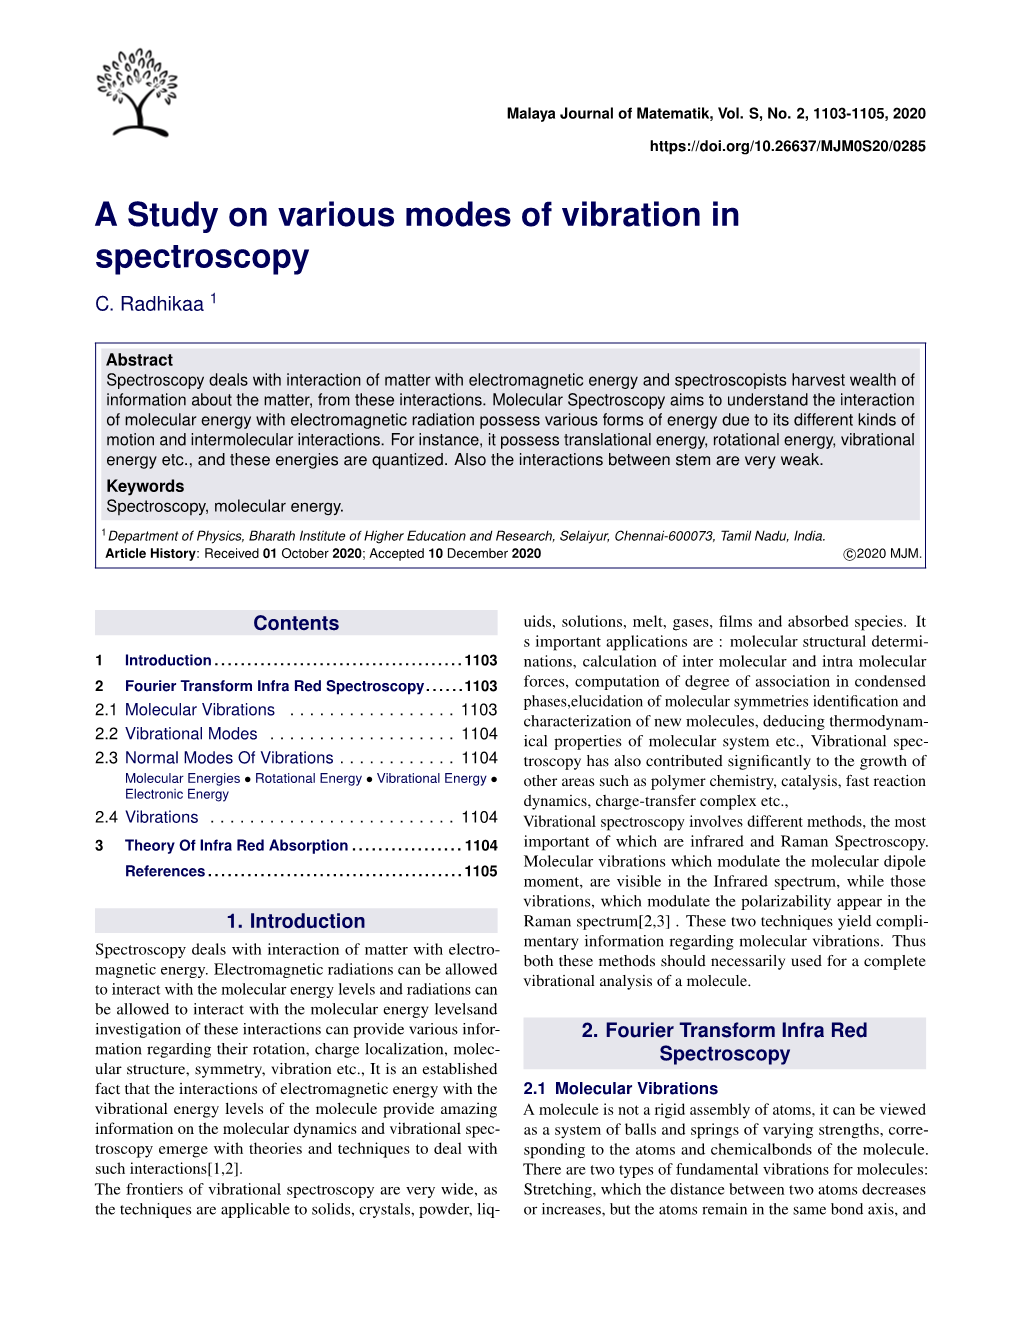 A Study on Various Modes of Vibration in Spectroscopy